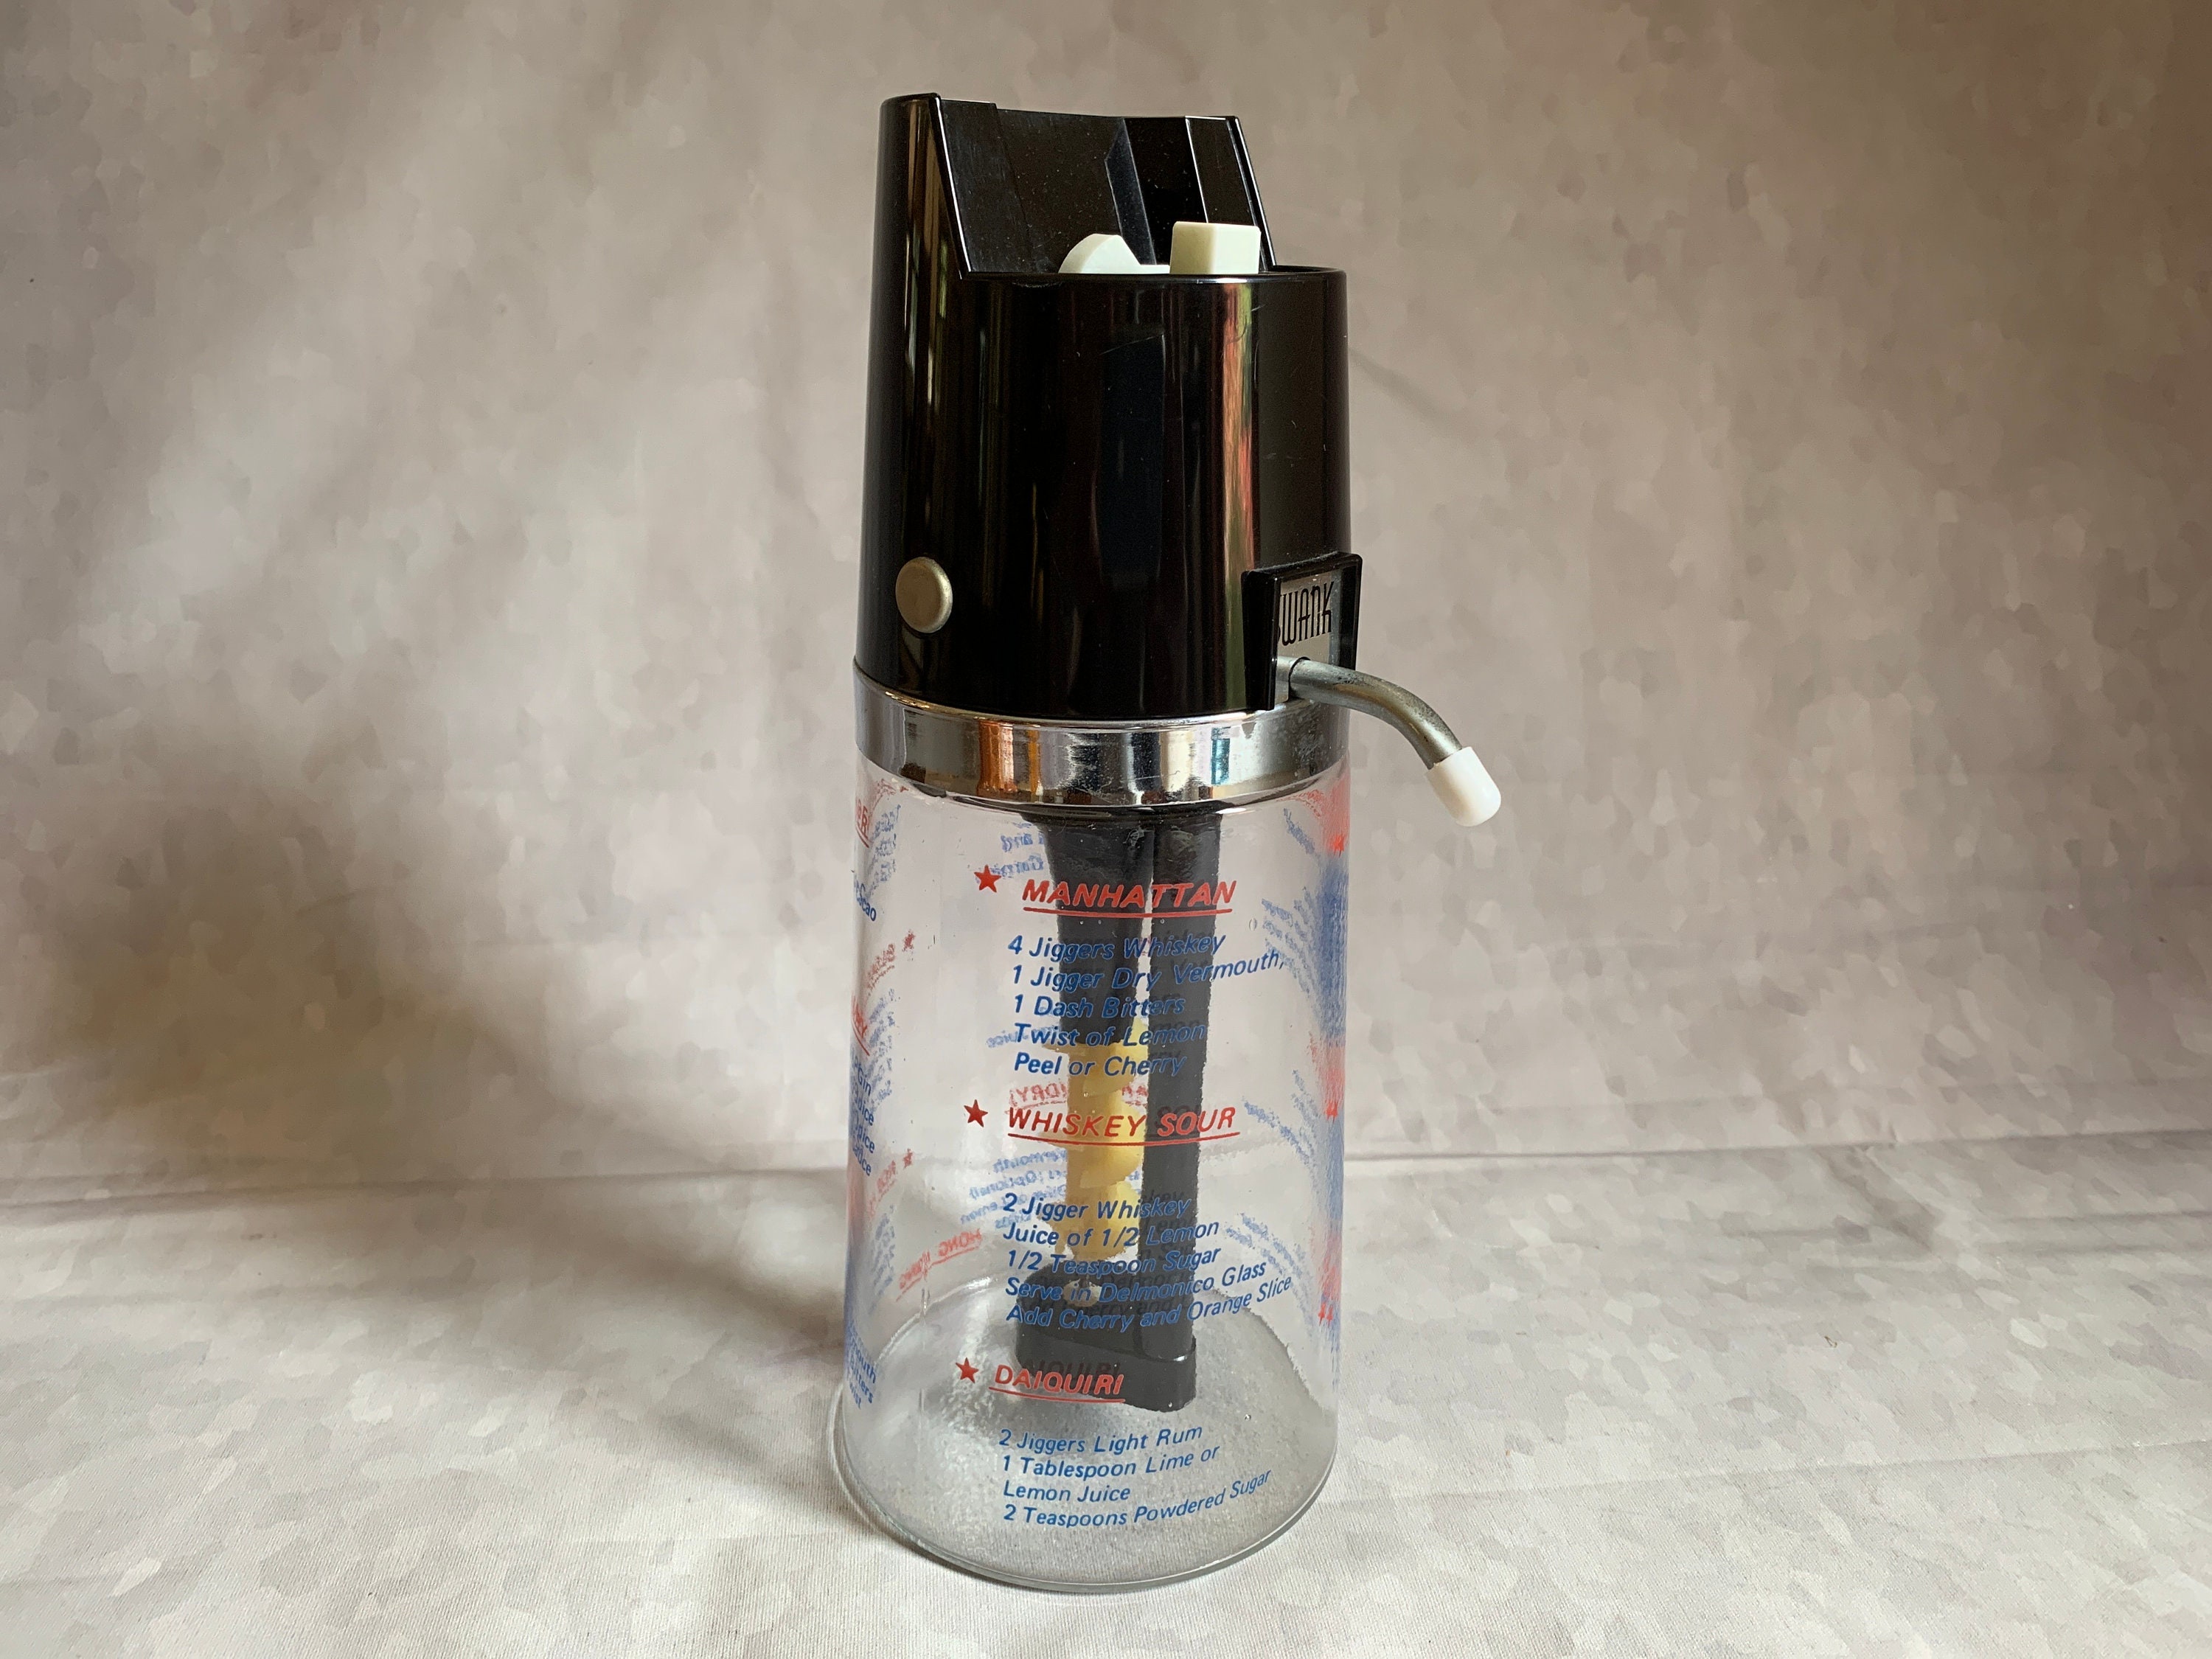 Electric Cocktail Mixer With Recipes and Battery Operated Function